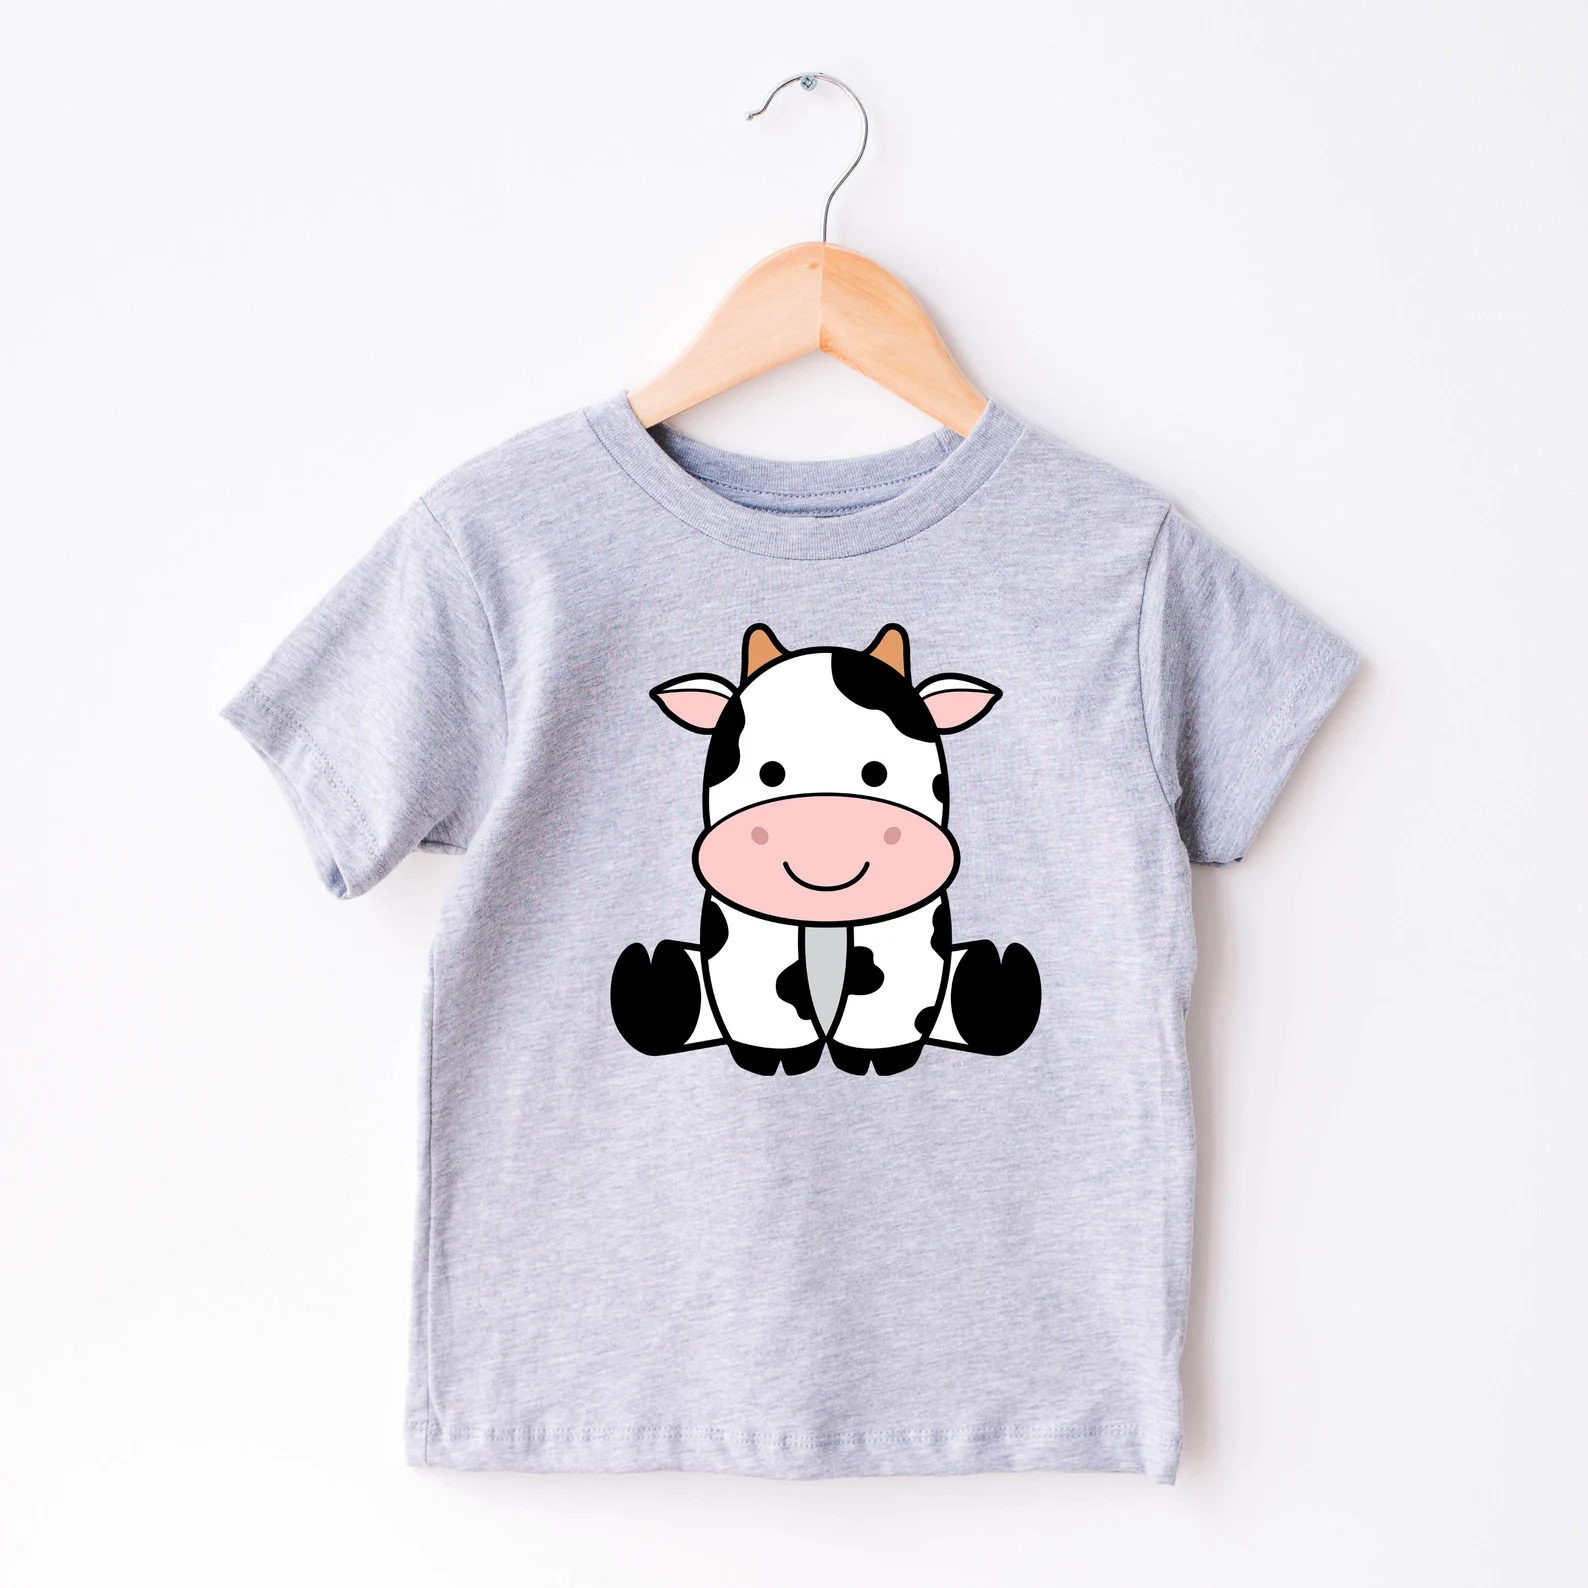 Baby t - shirt with a cartoon cow on it.